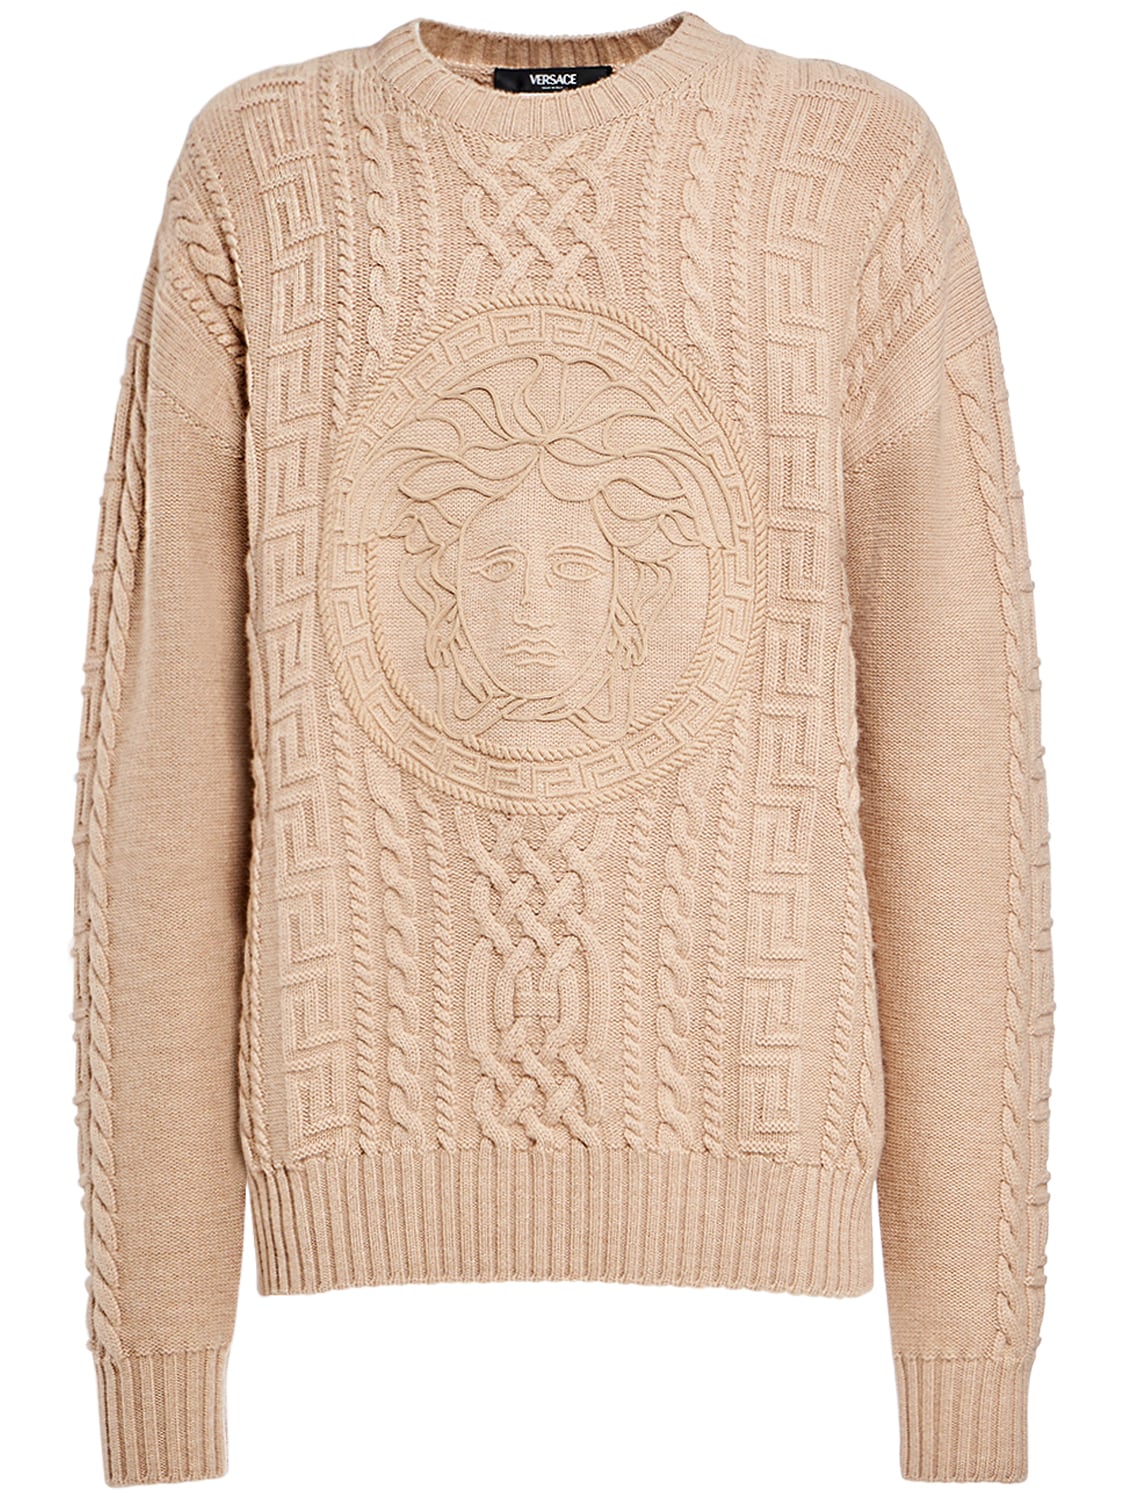 Image of Medusa Embroidery Wool Knit Sweater